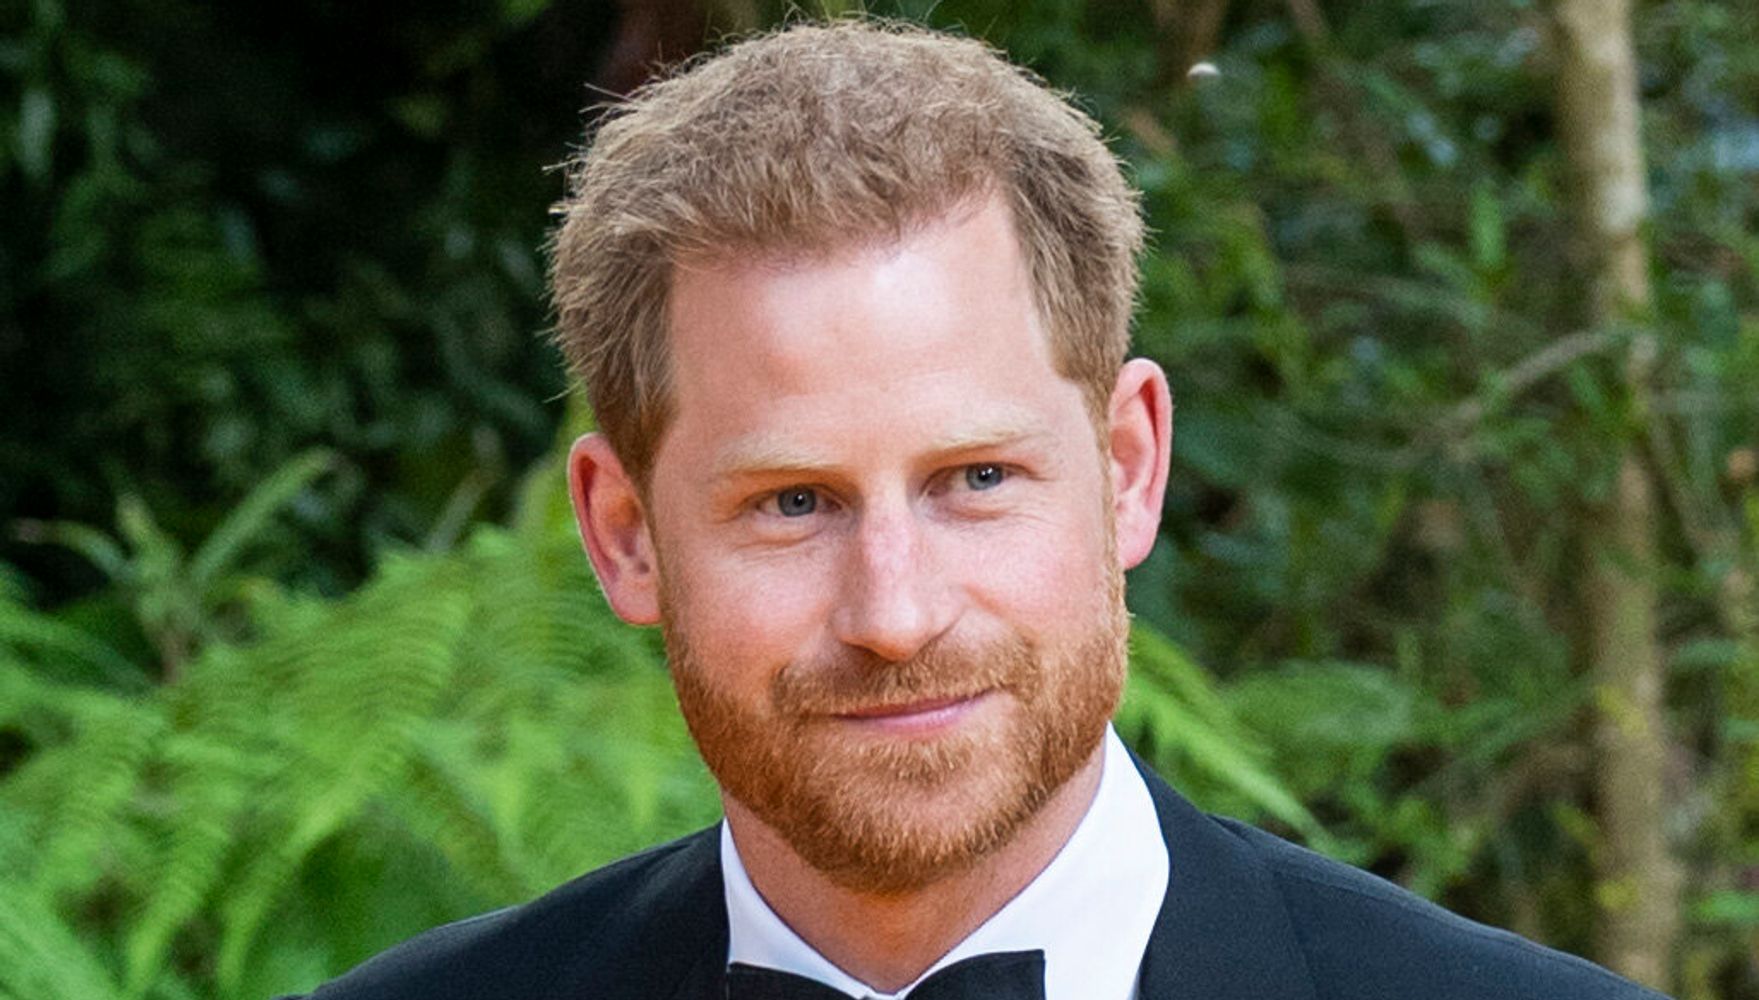 Prince Harry Calls Out 'Those Who Peddle In Lies And Fear' In Speech For COVID-19 'Heroes'